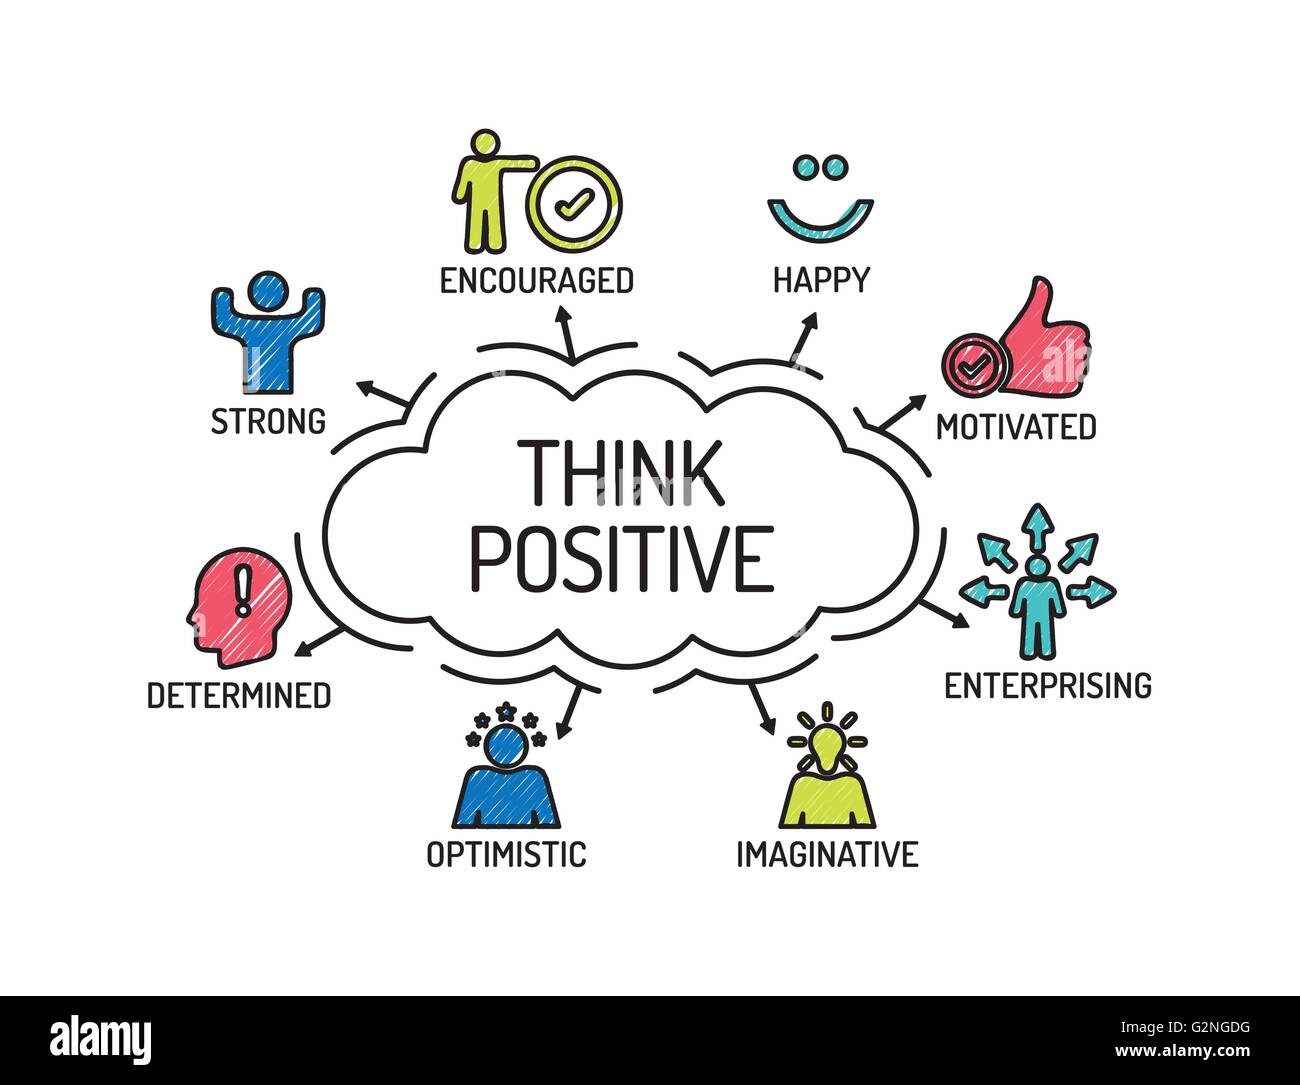 Think Positive. Chart with keywords and icons. Sketch Stock Vector Art